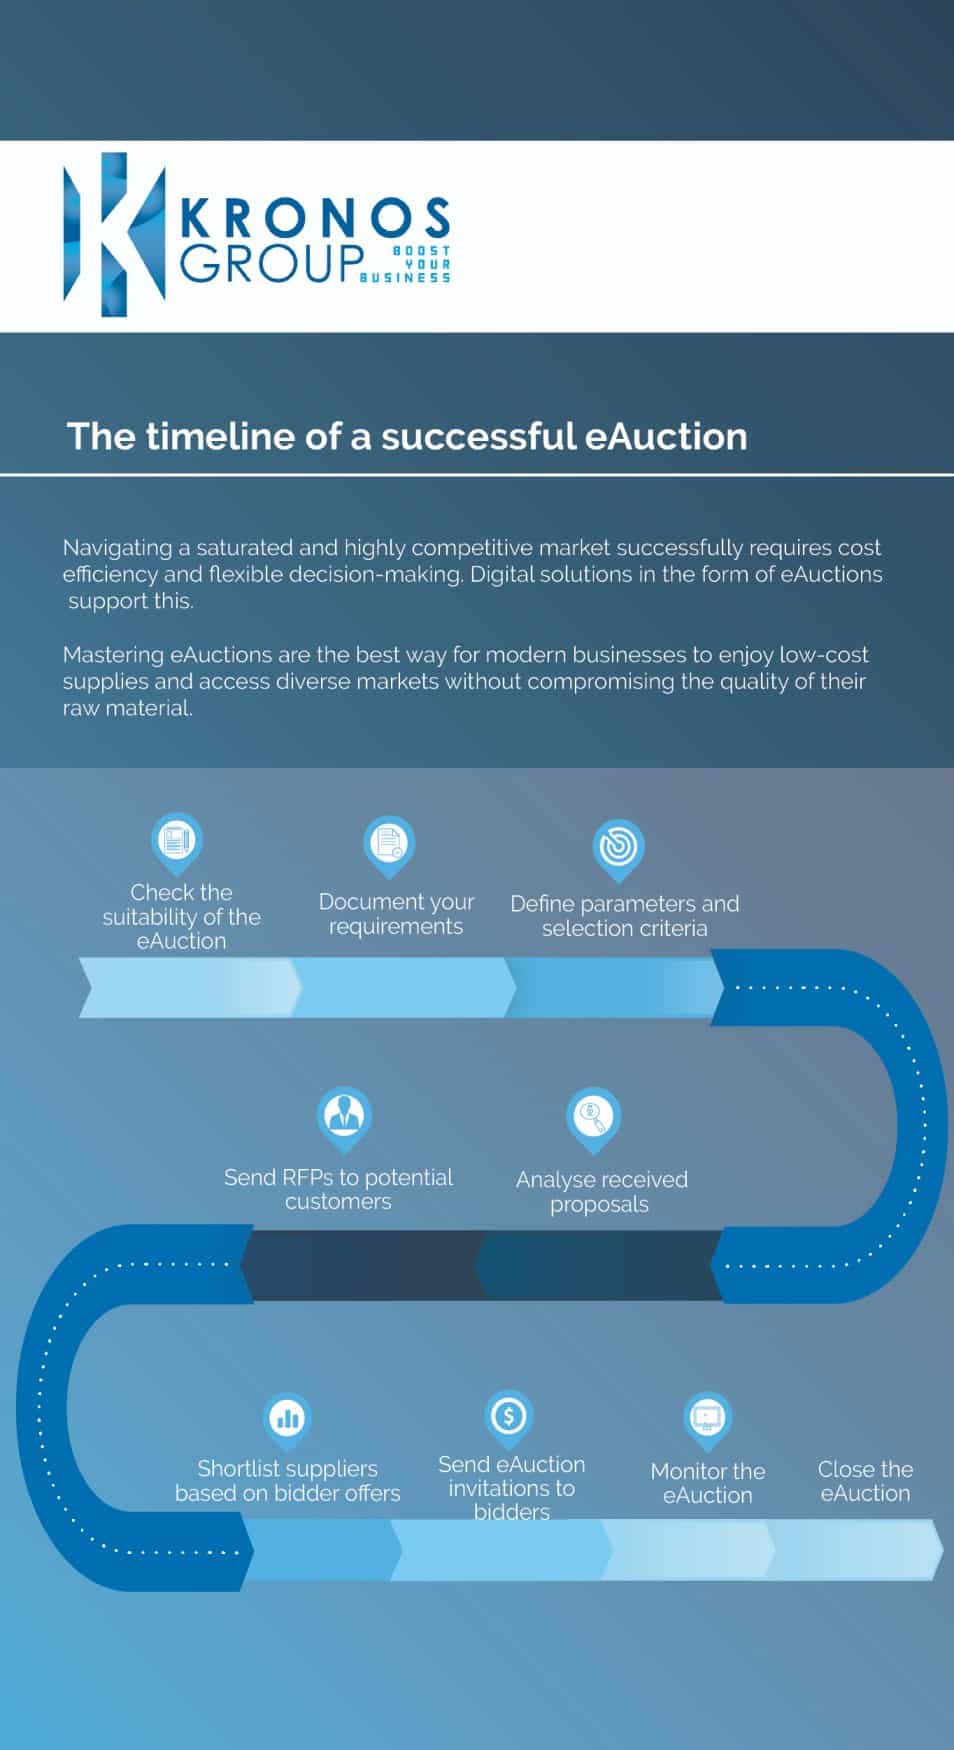 The timeline of a successful eAuction